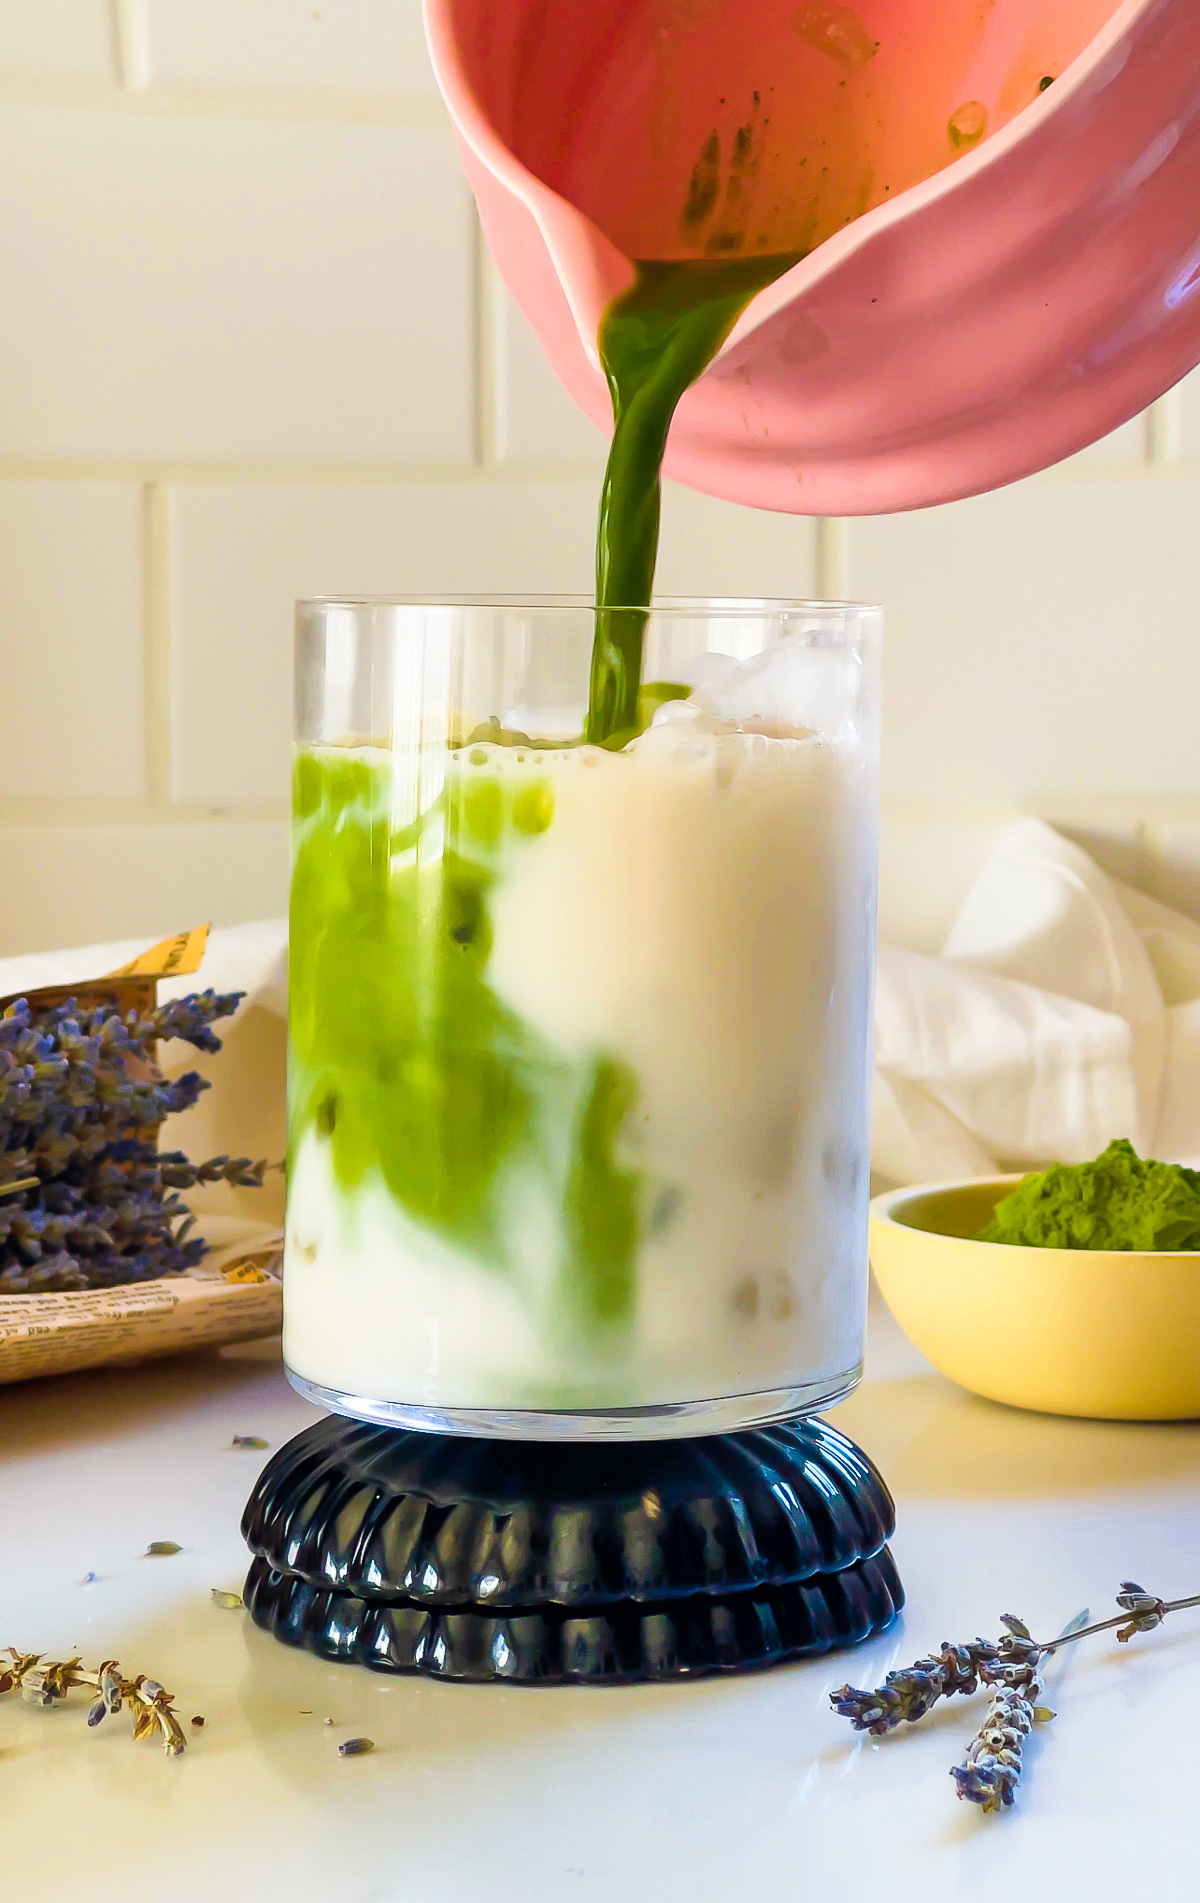 pouring lavender flavored matcha tea into glass of iced milk on stack of blue coasters.